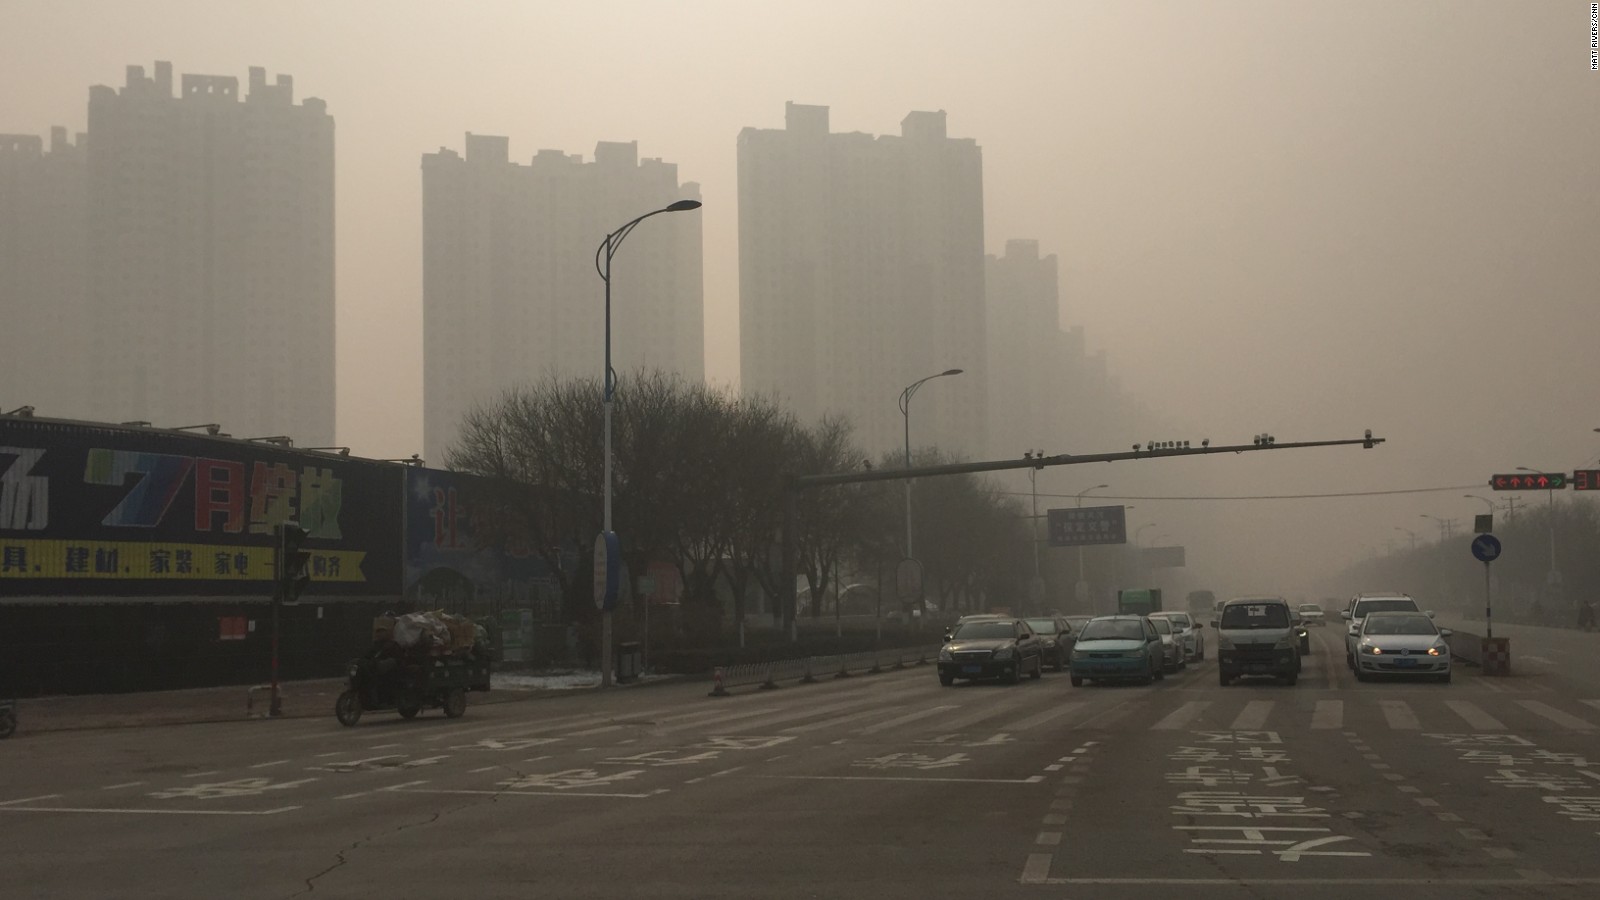 With most Chinese cities looking like this, they must really feel at home during haze season. Image from CNN